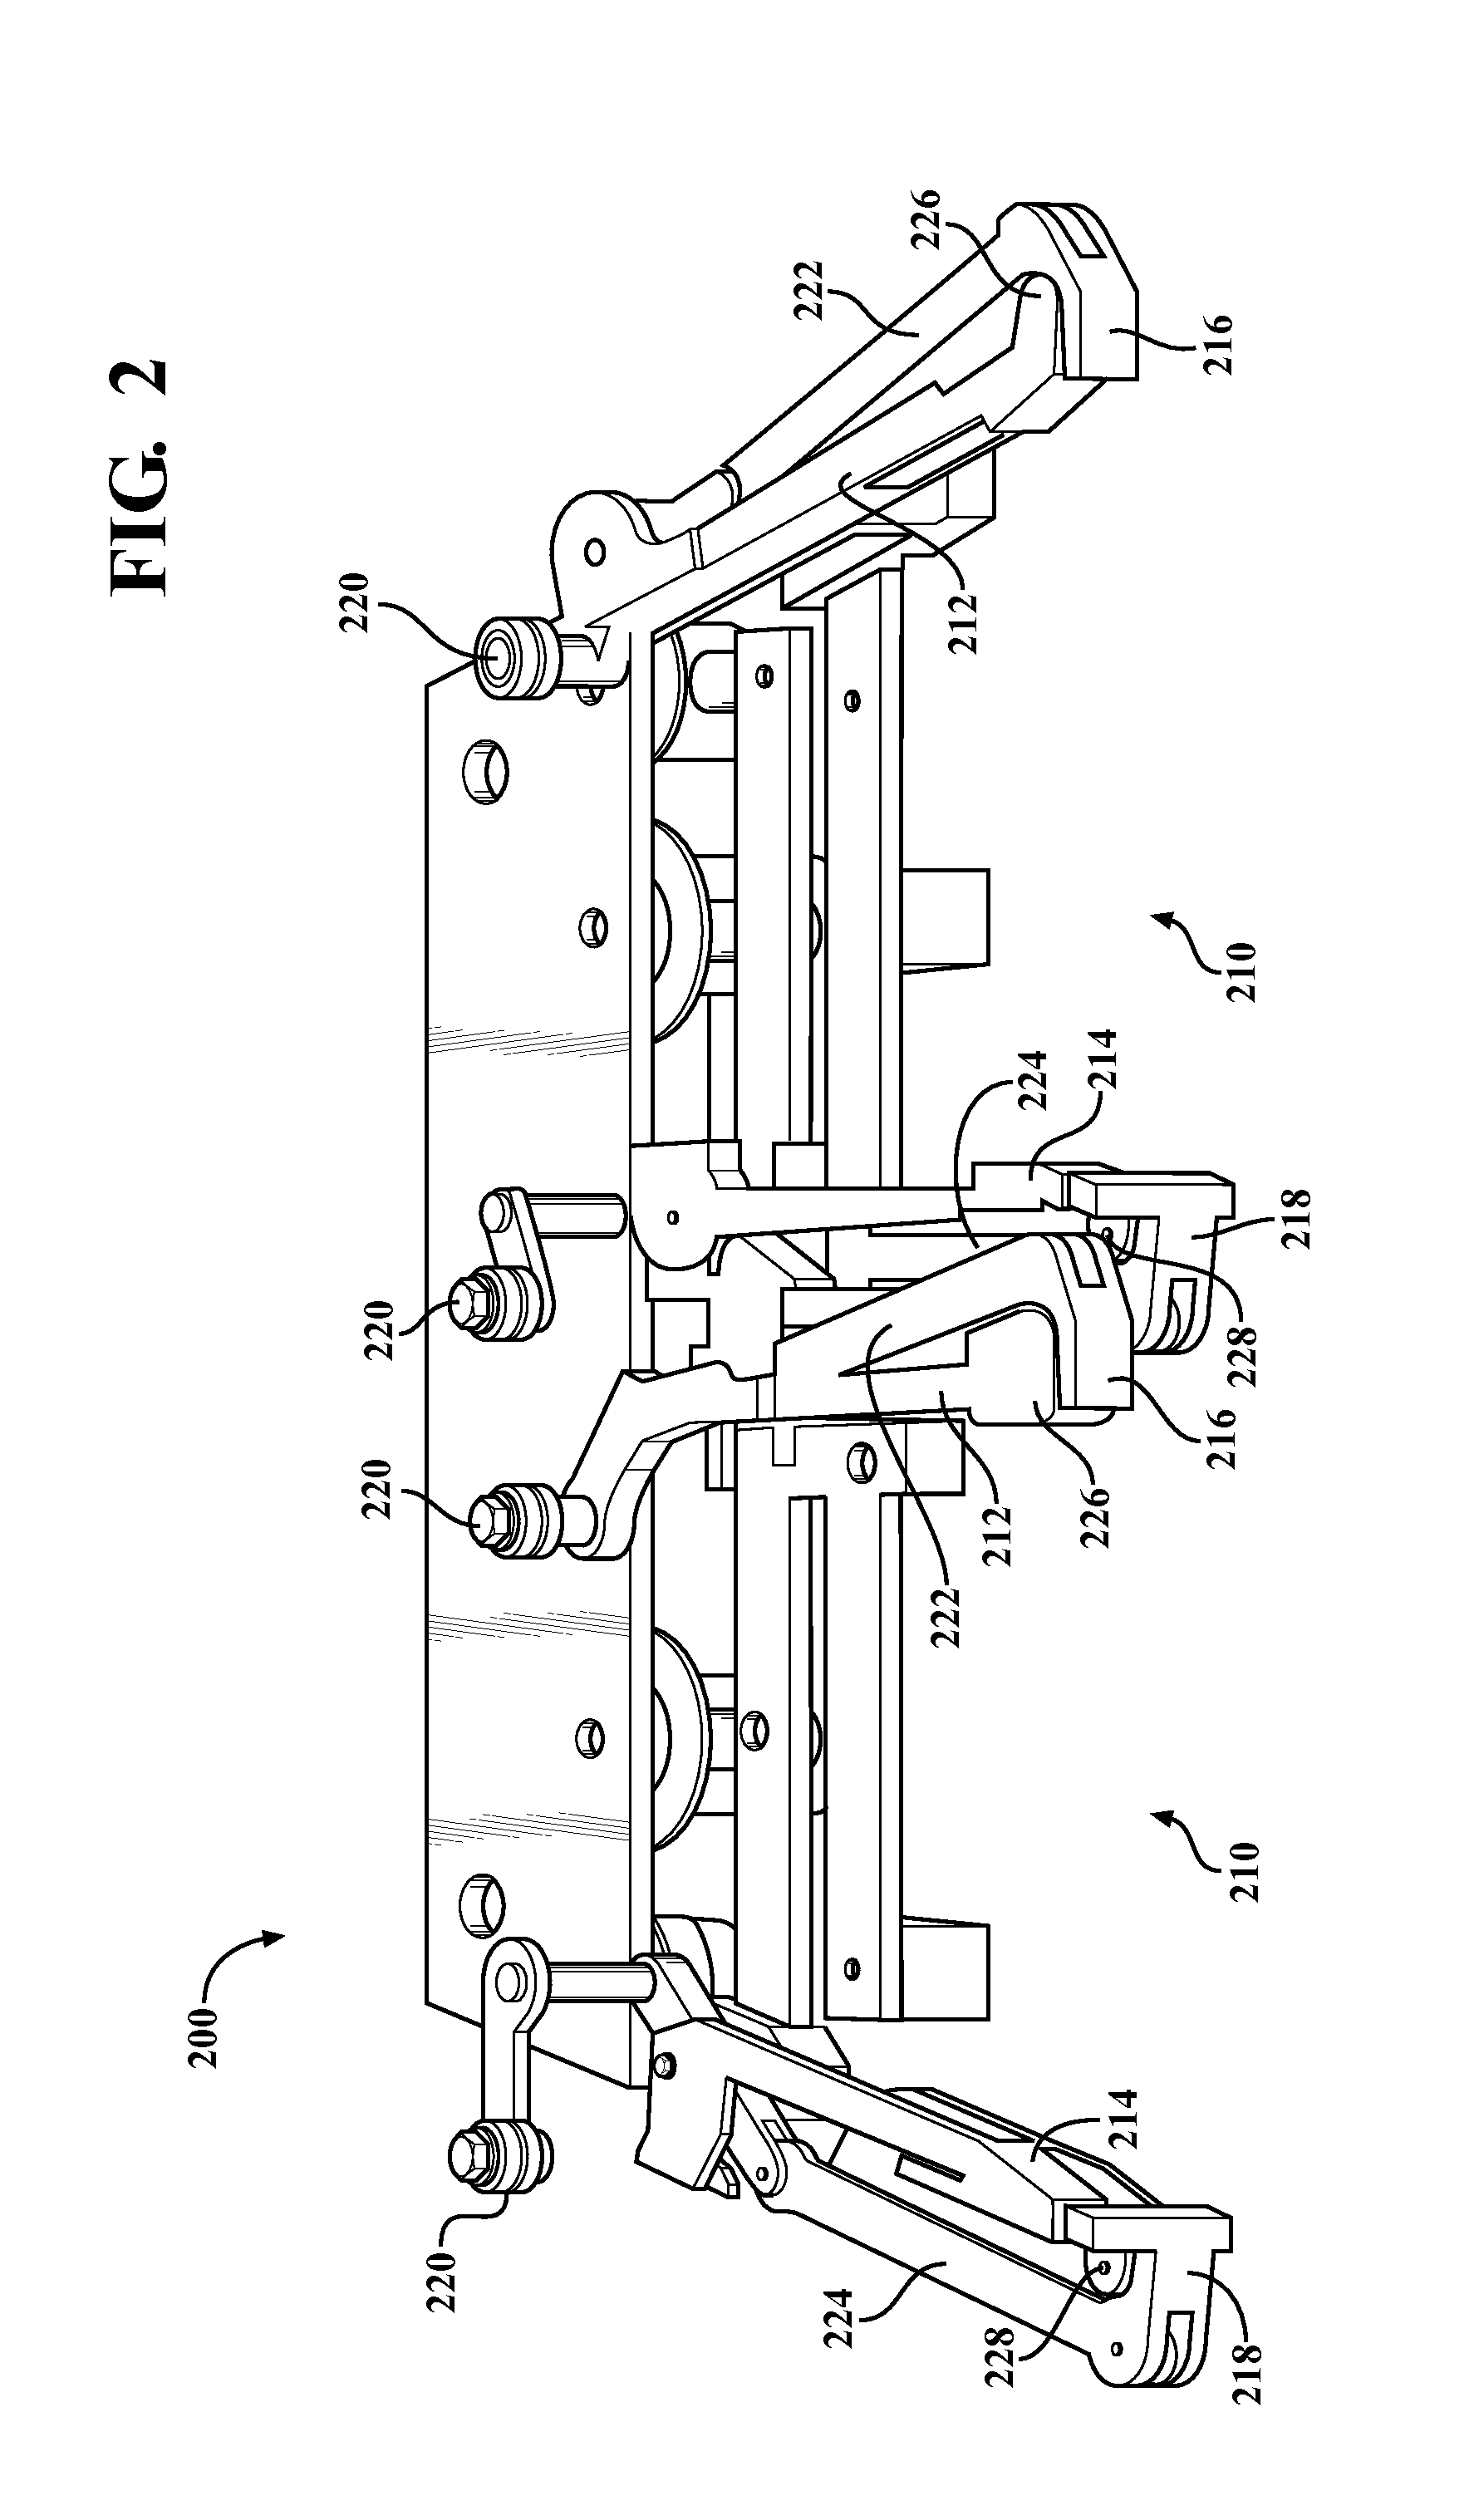 Method and apparatus for the two stage filling of flexible pouches